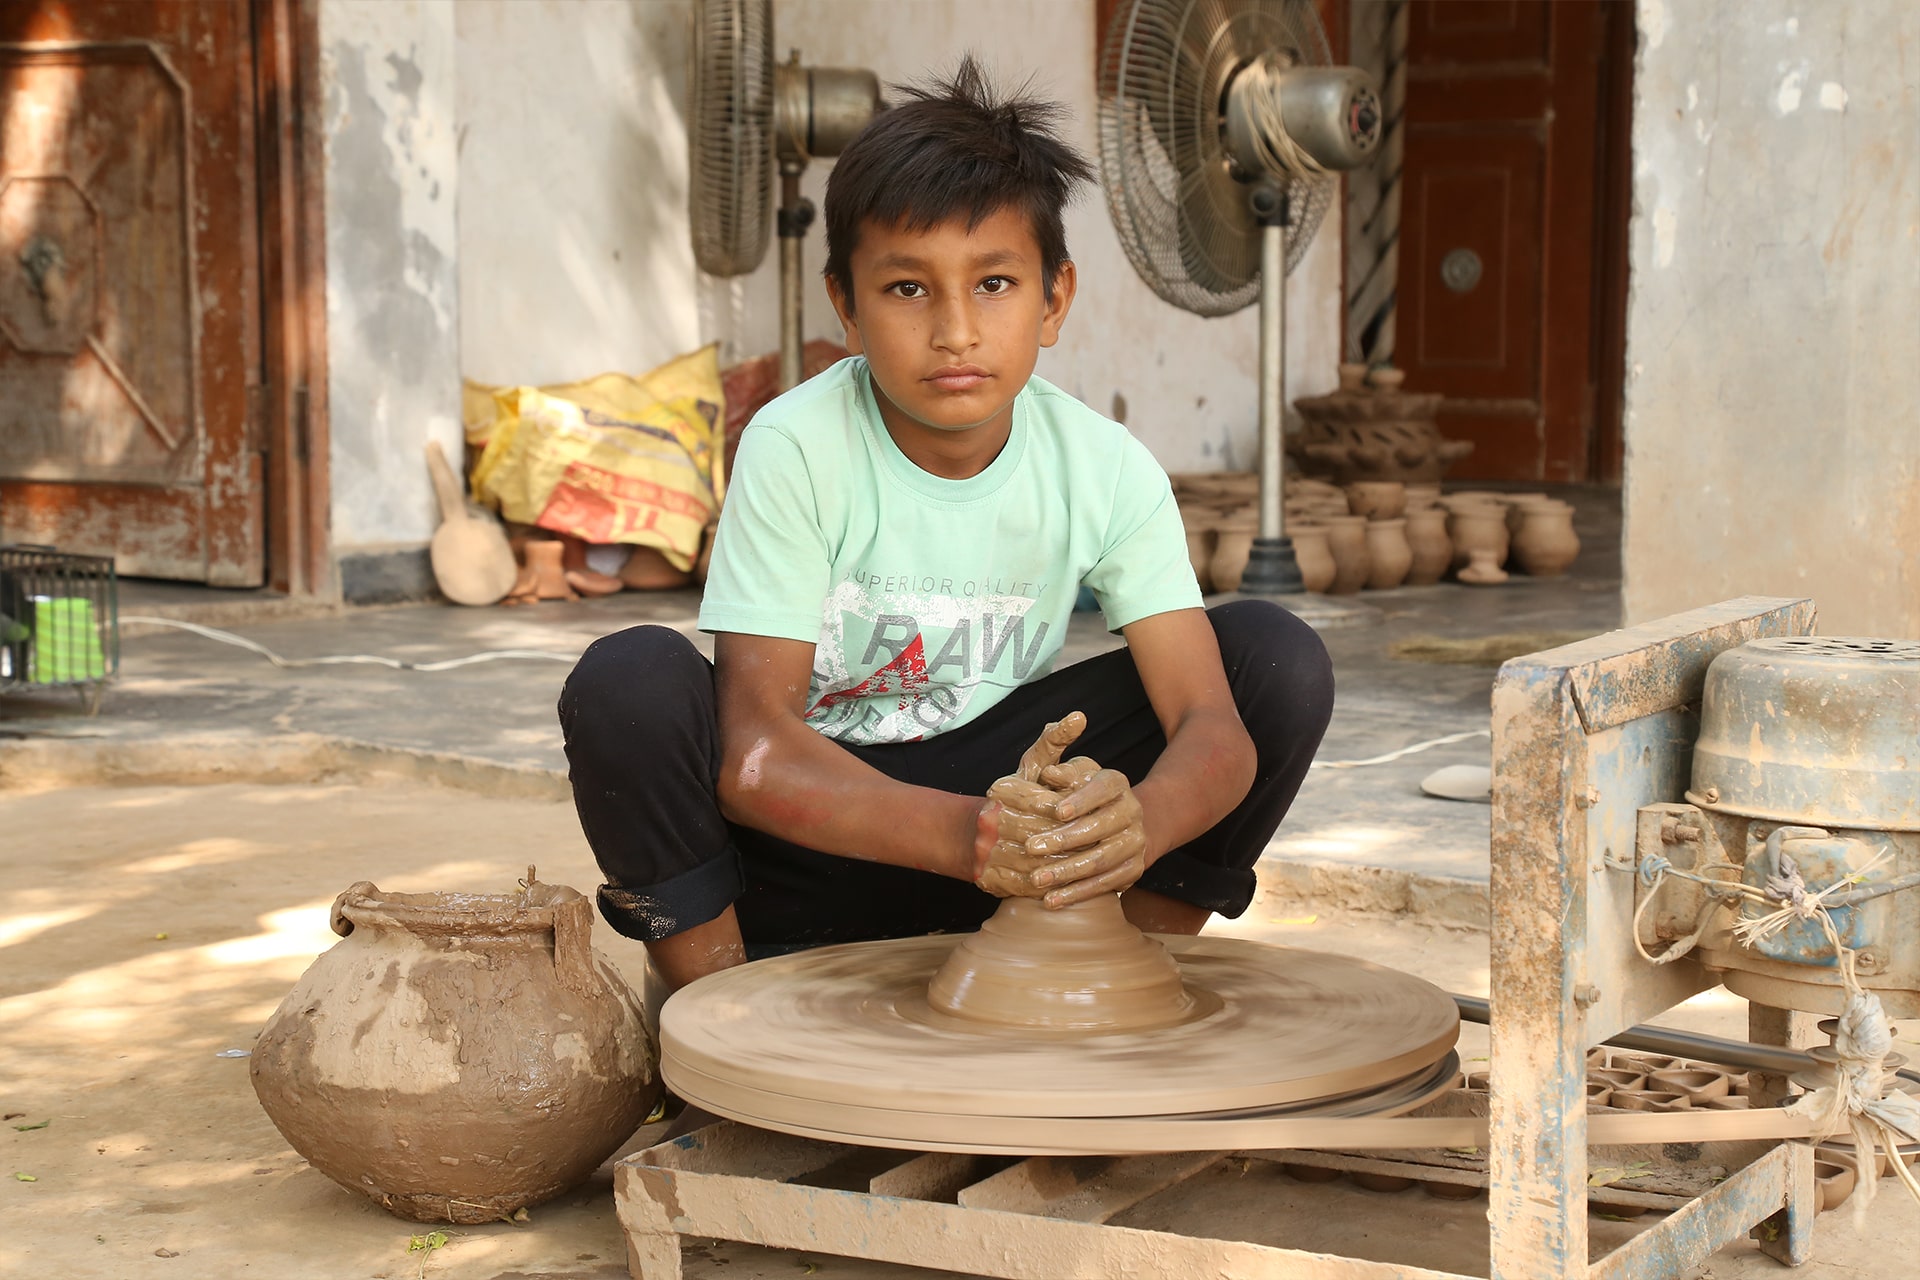 Supporting the Dream of Sameer, an Artisan